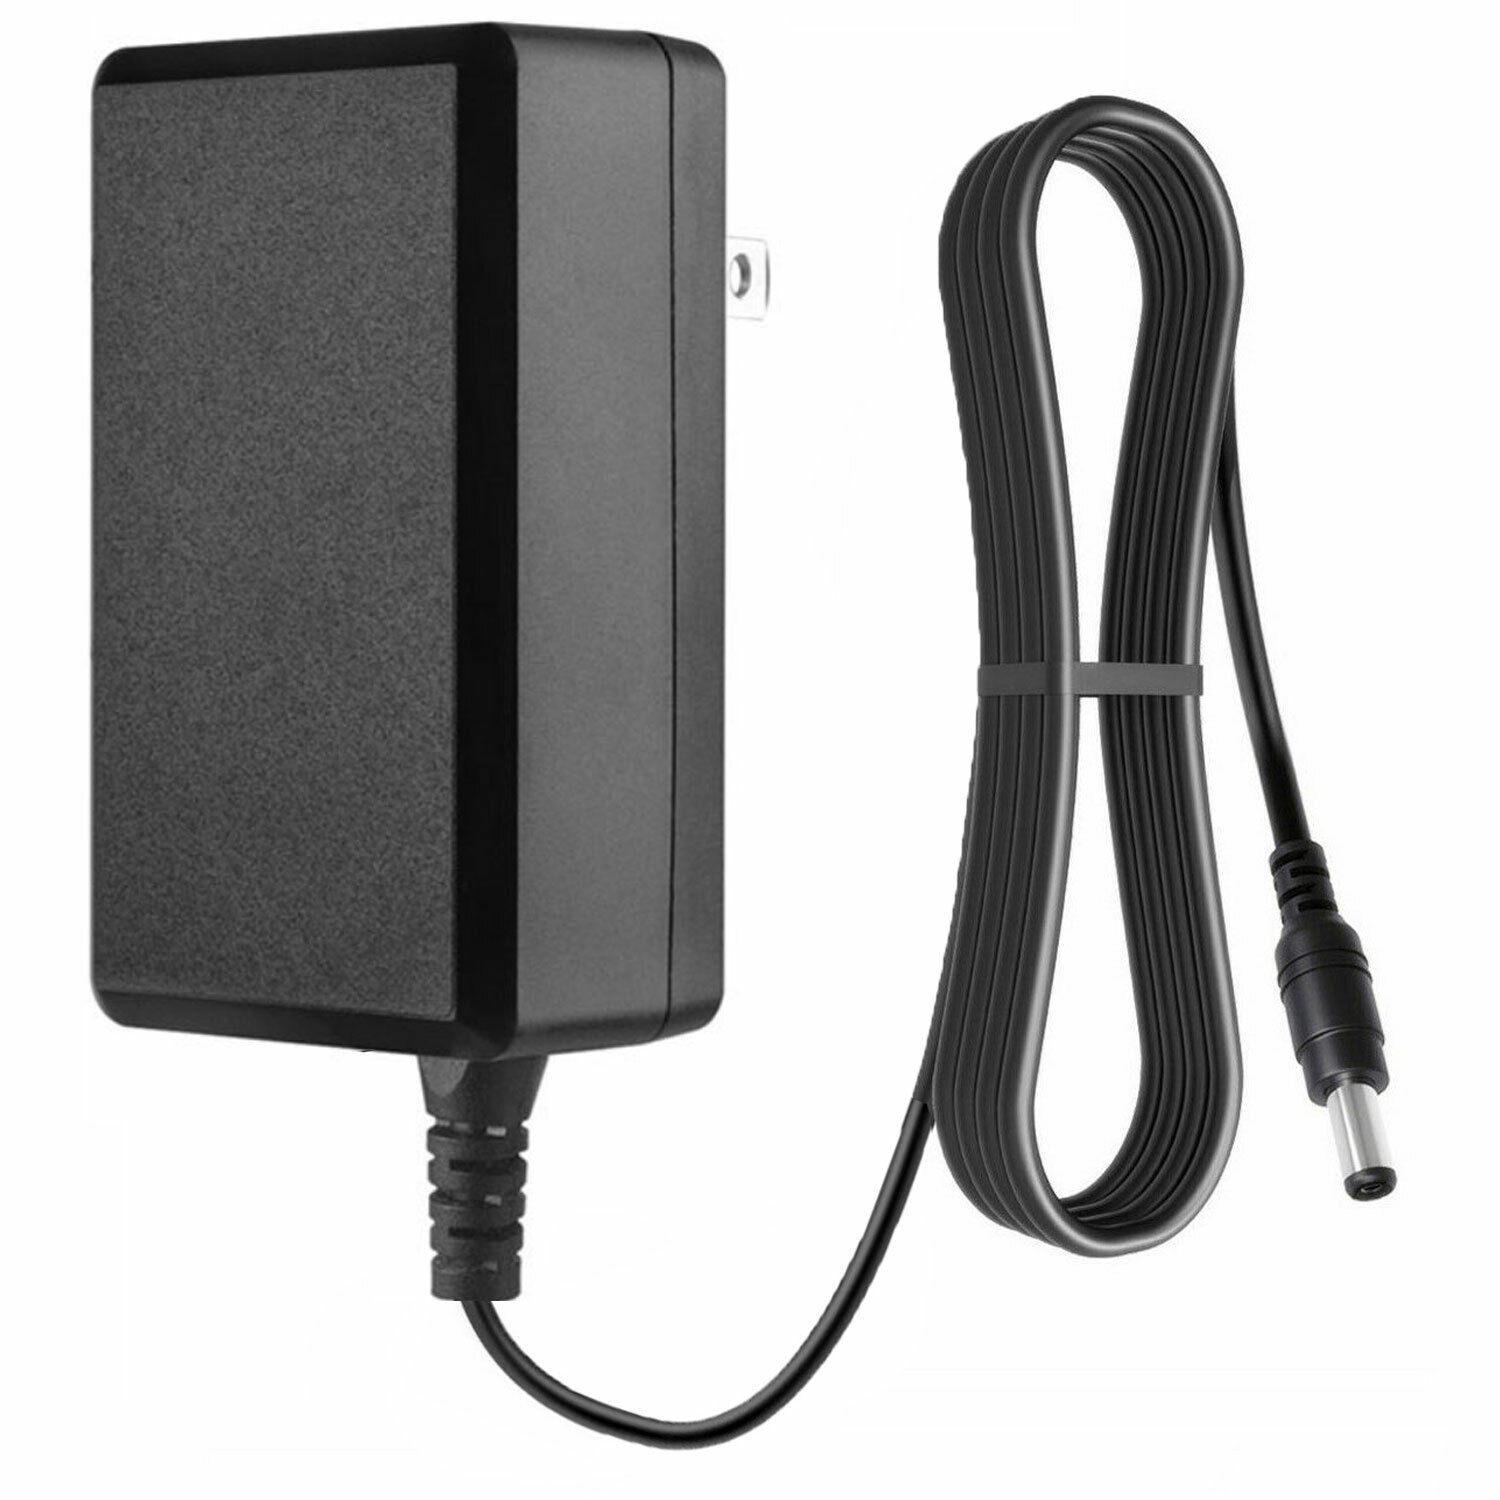 12V Power Supply Adapter For Numark NVII Serato DJ Controller DC Charger Cord original packaging (where packaging is .